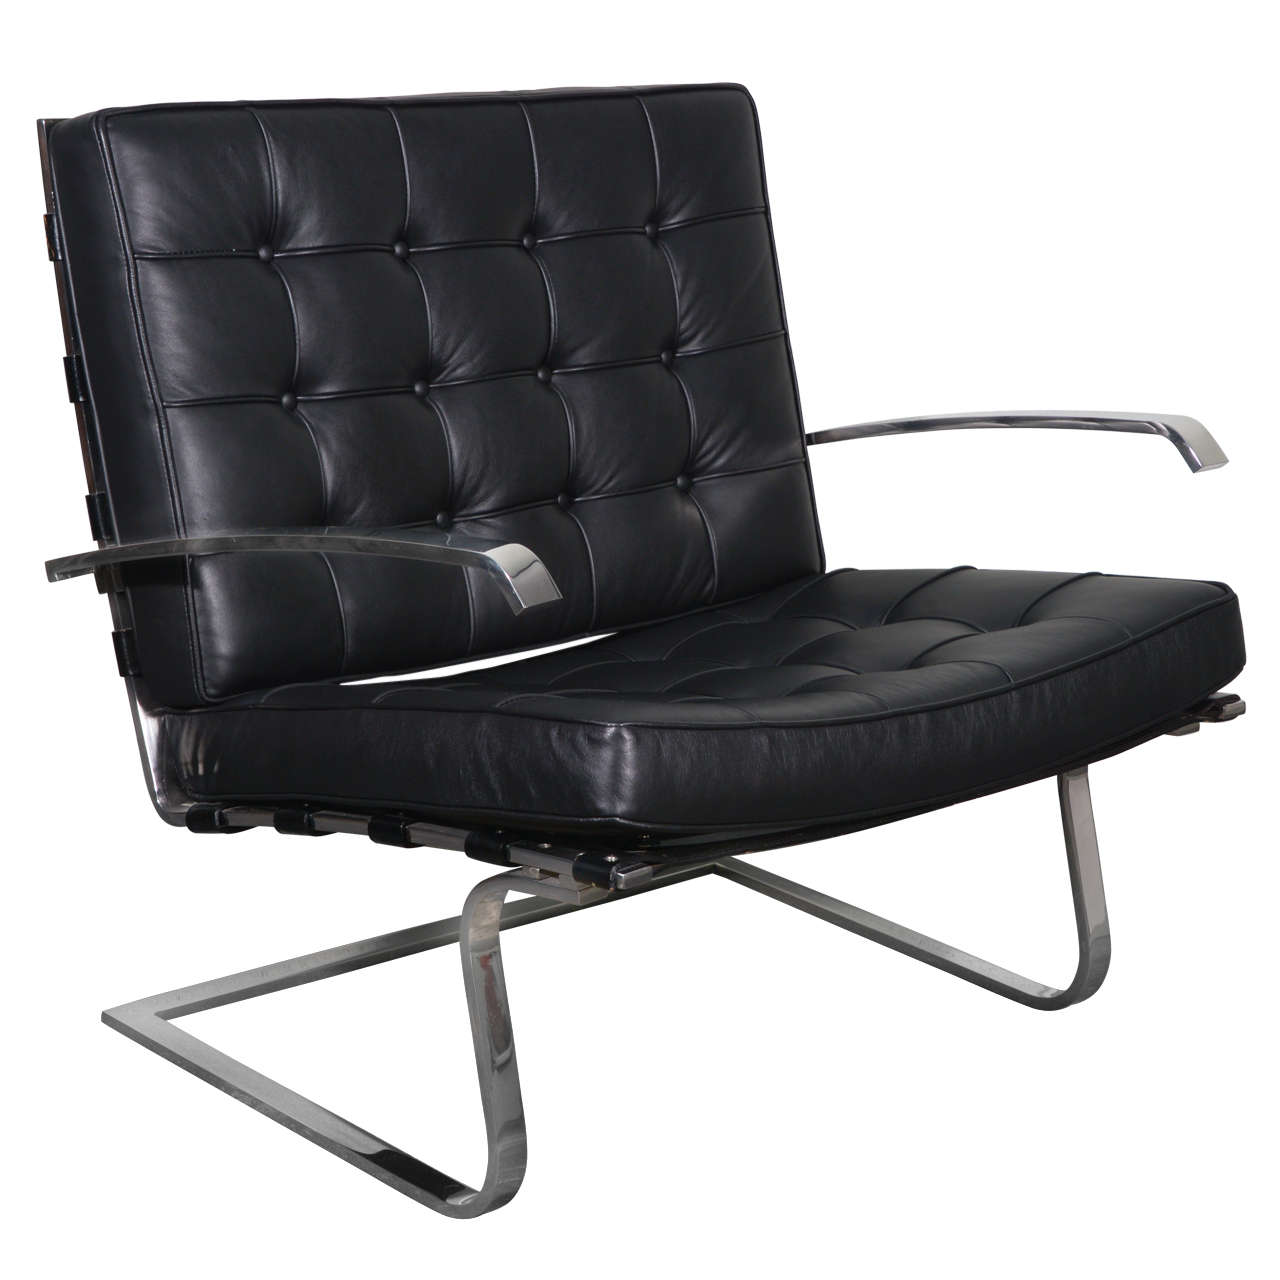 Ludwig Mies van der Rohe Tugendhat lounge chair by Knoll at 1stDibs